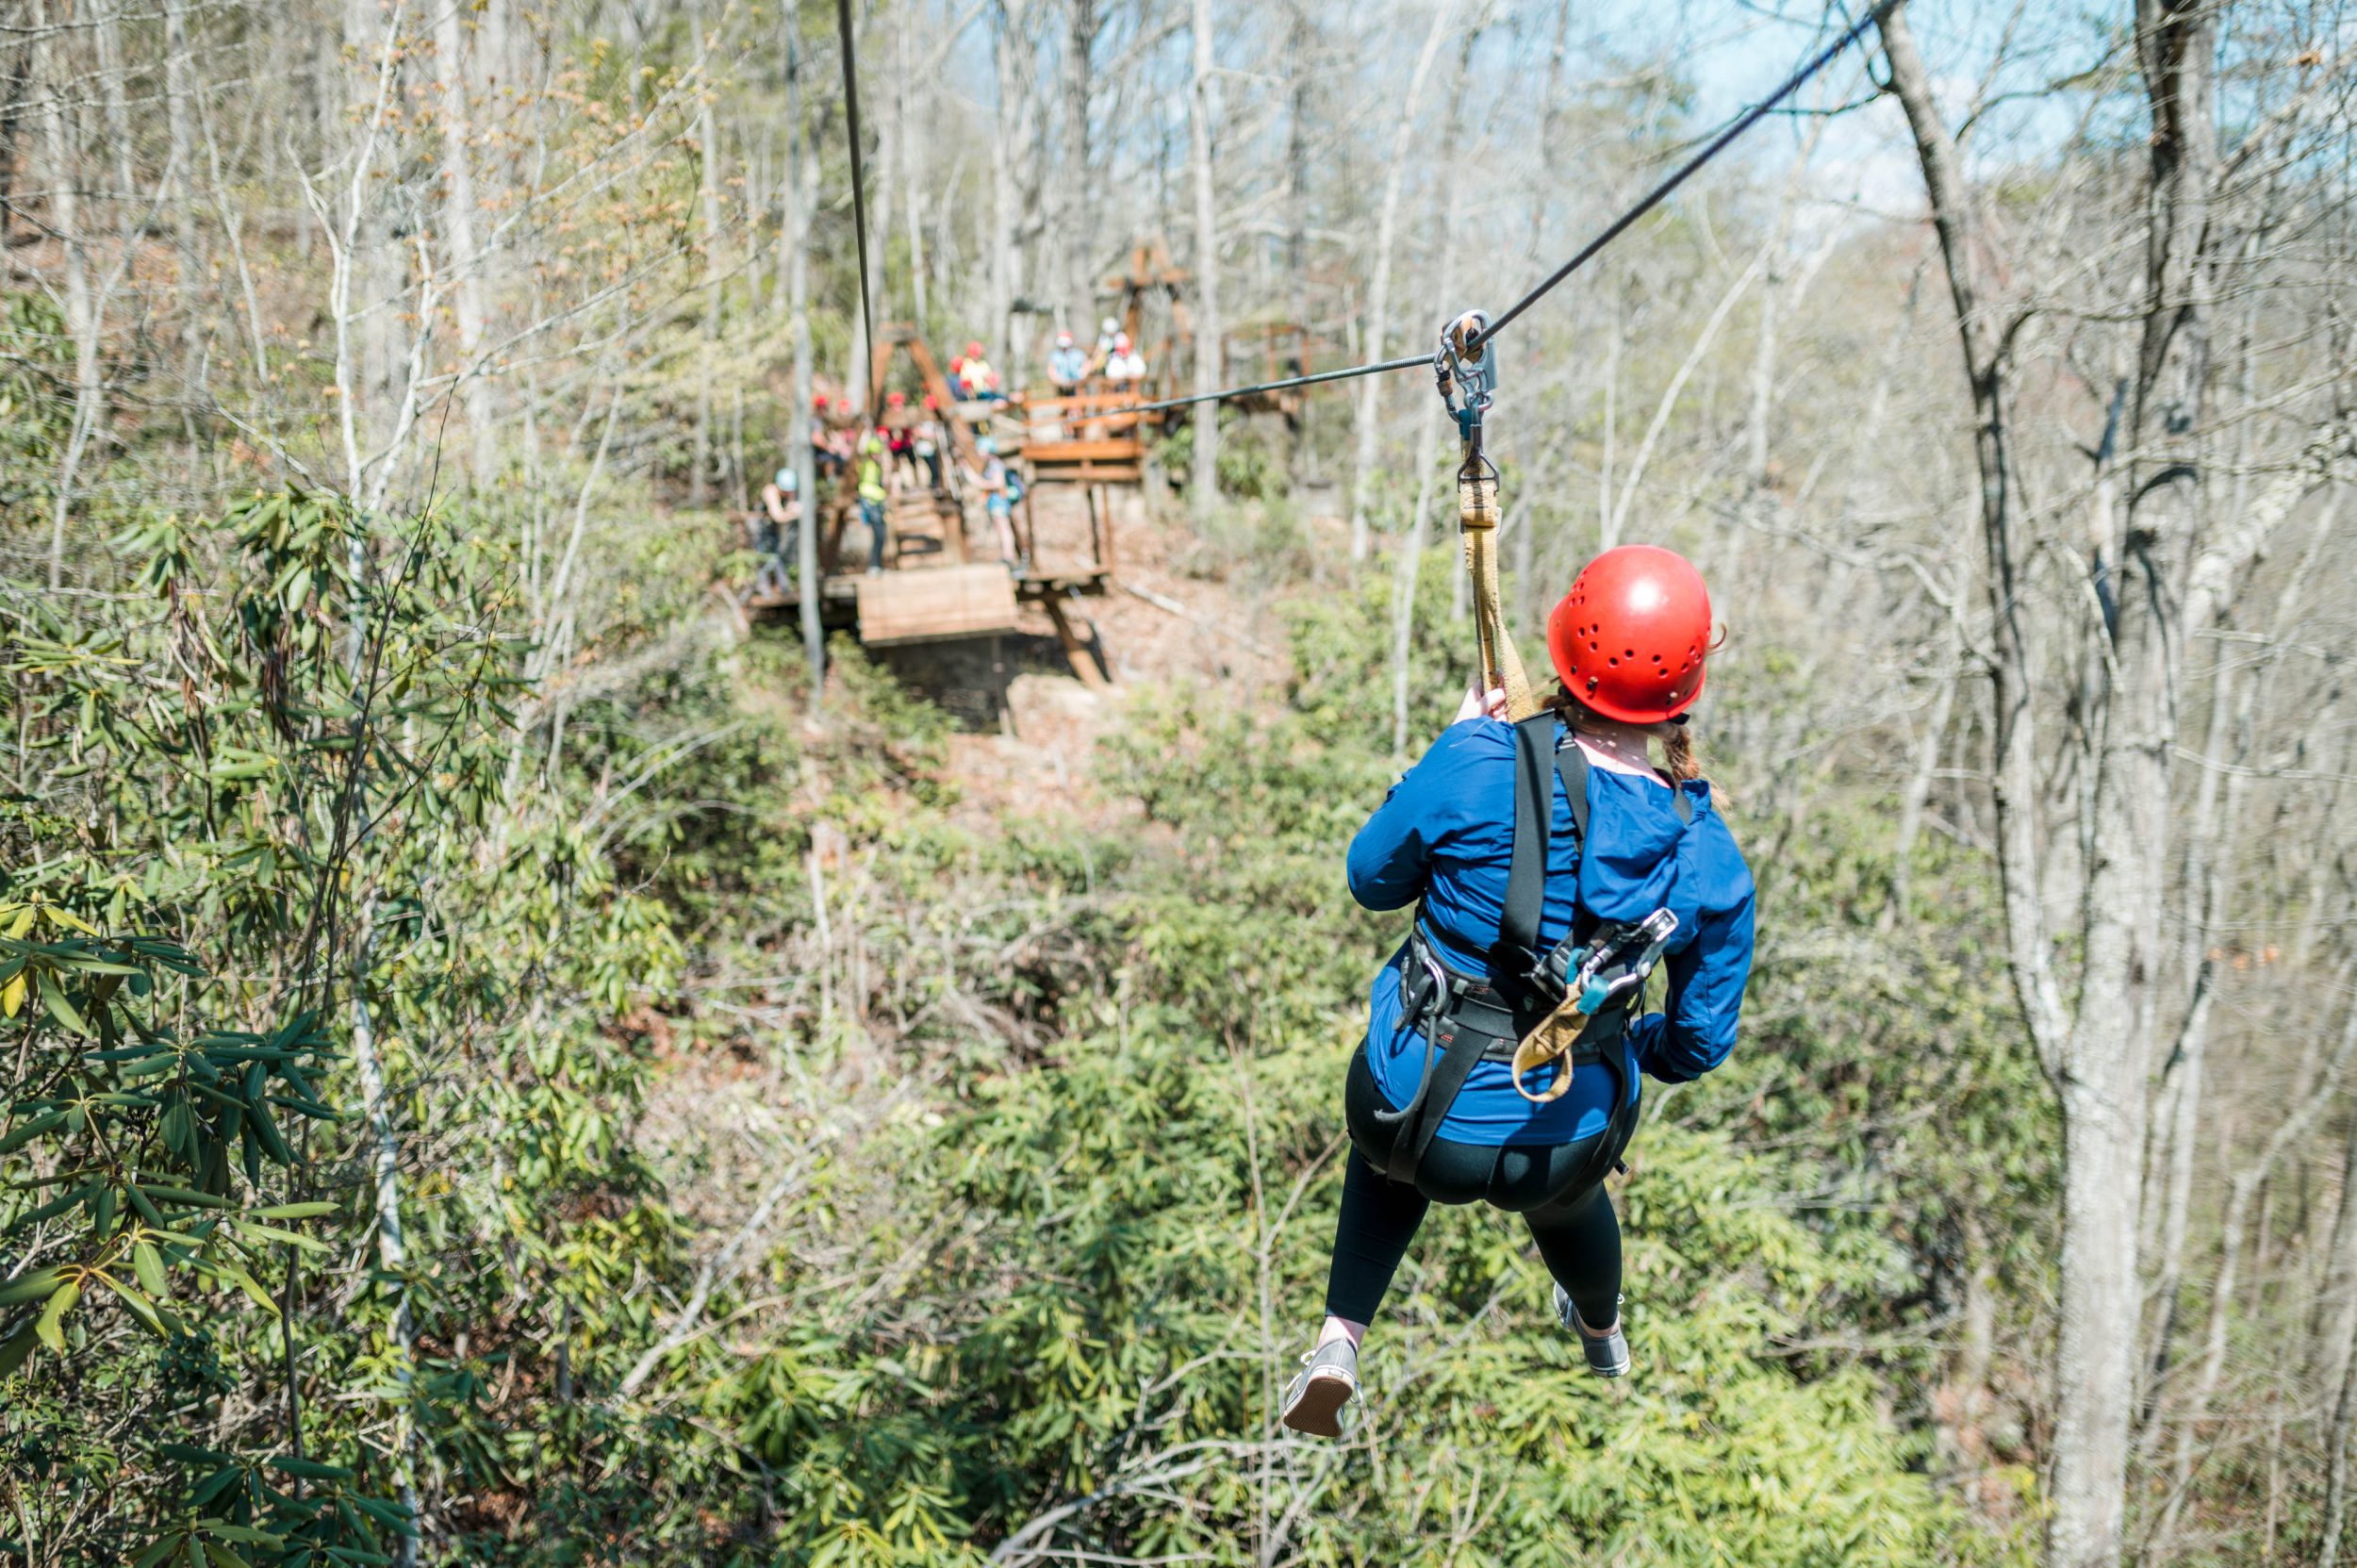 Ziplining in the New River Gorge